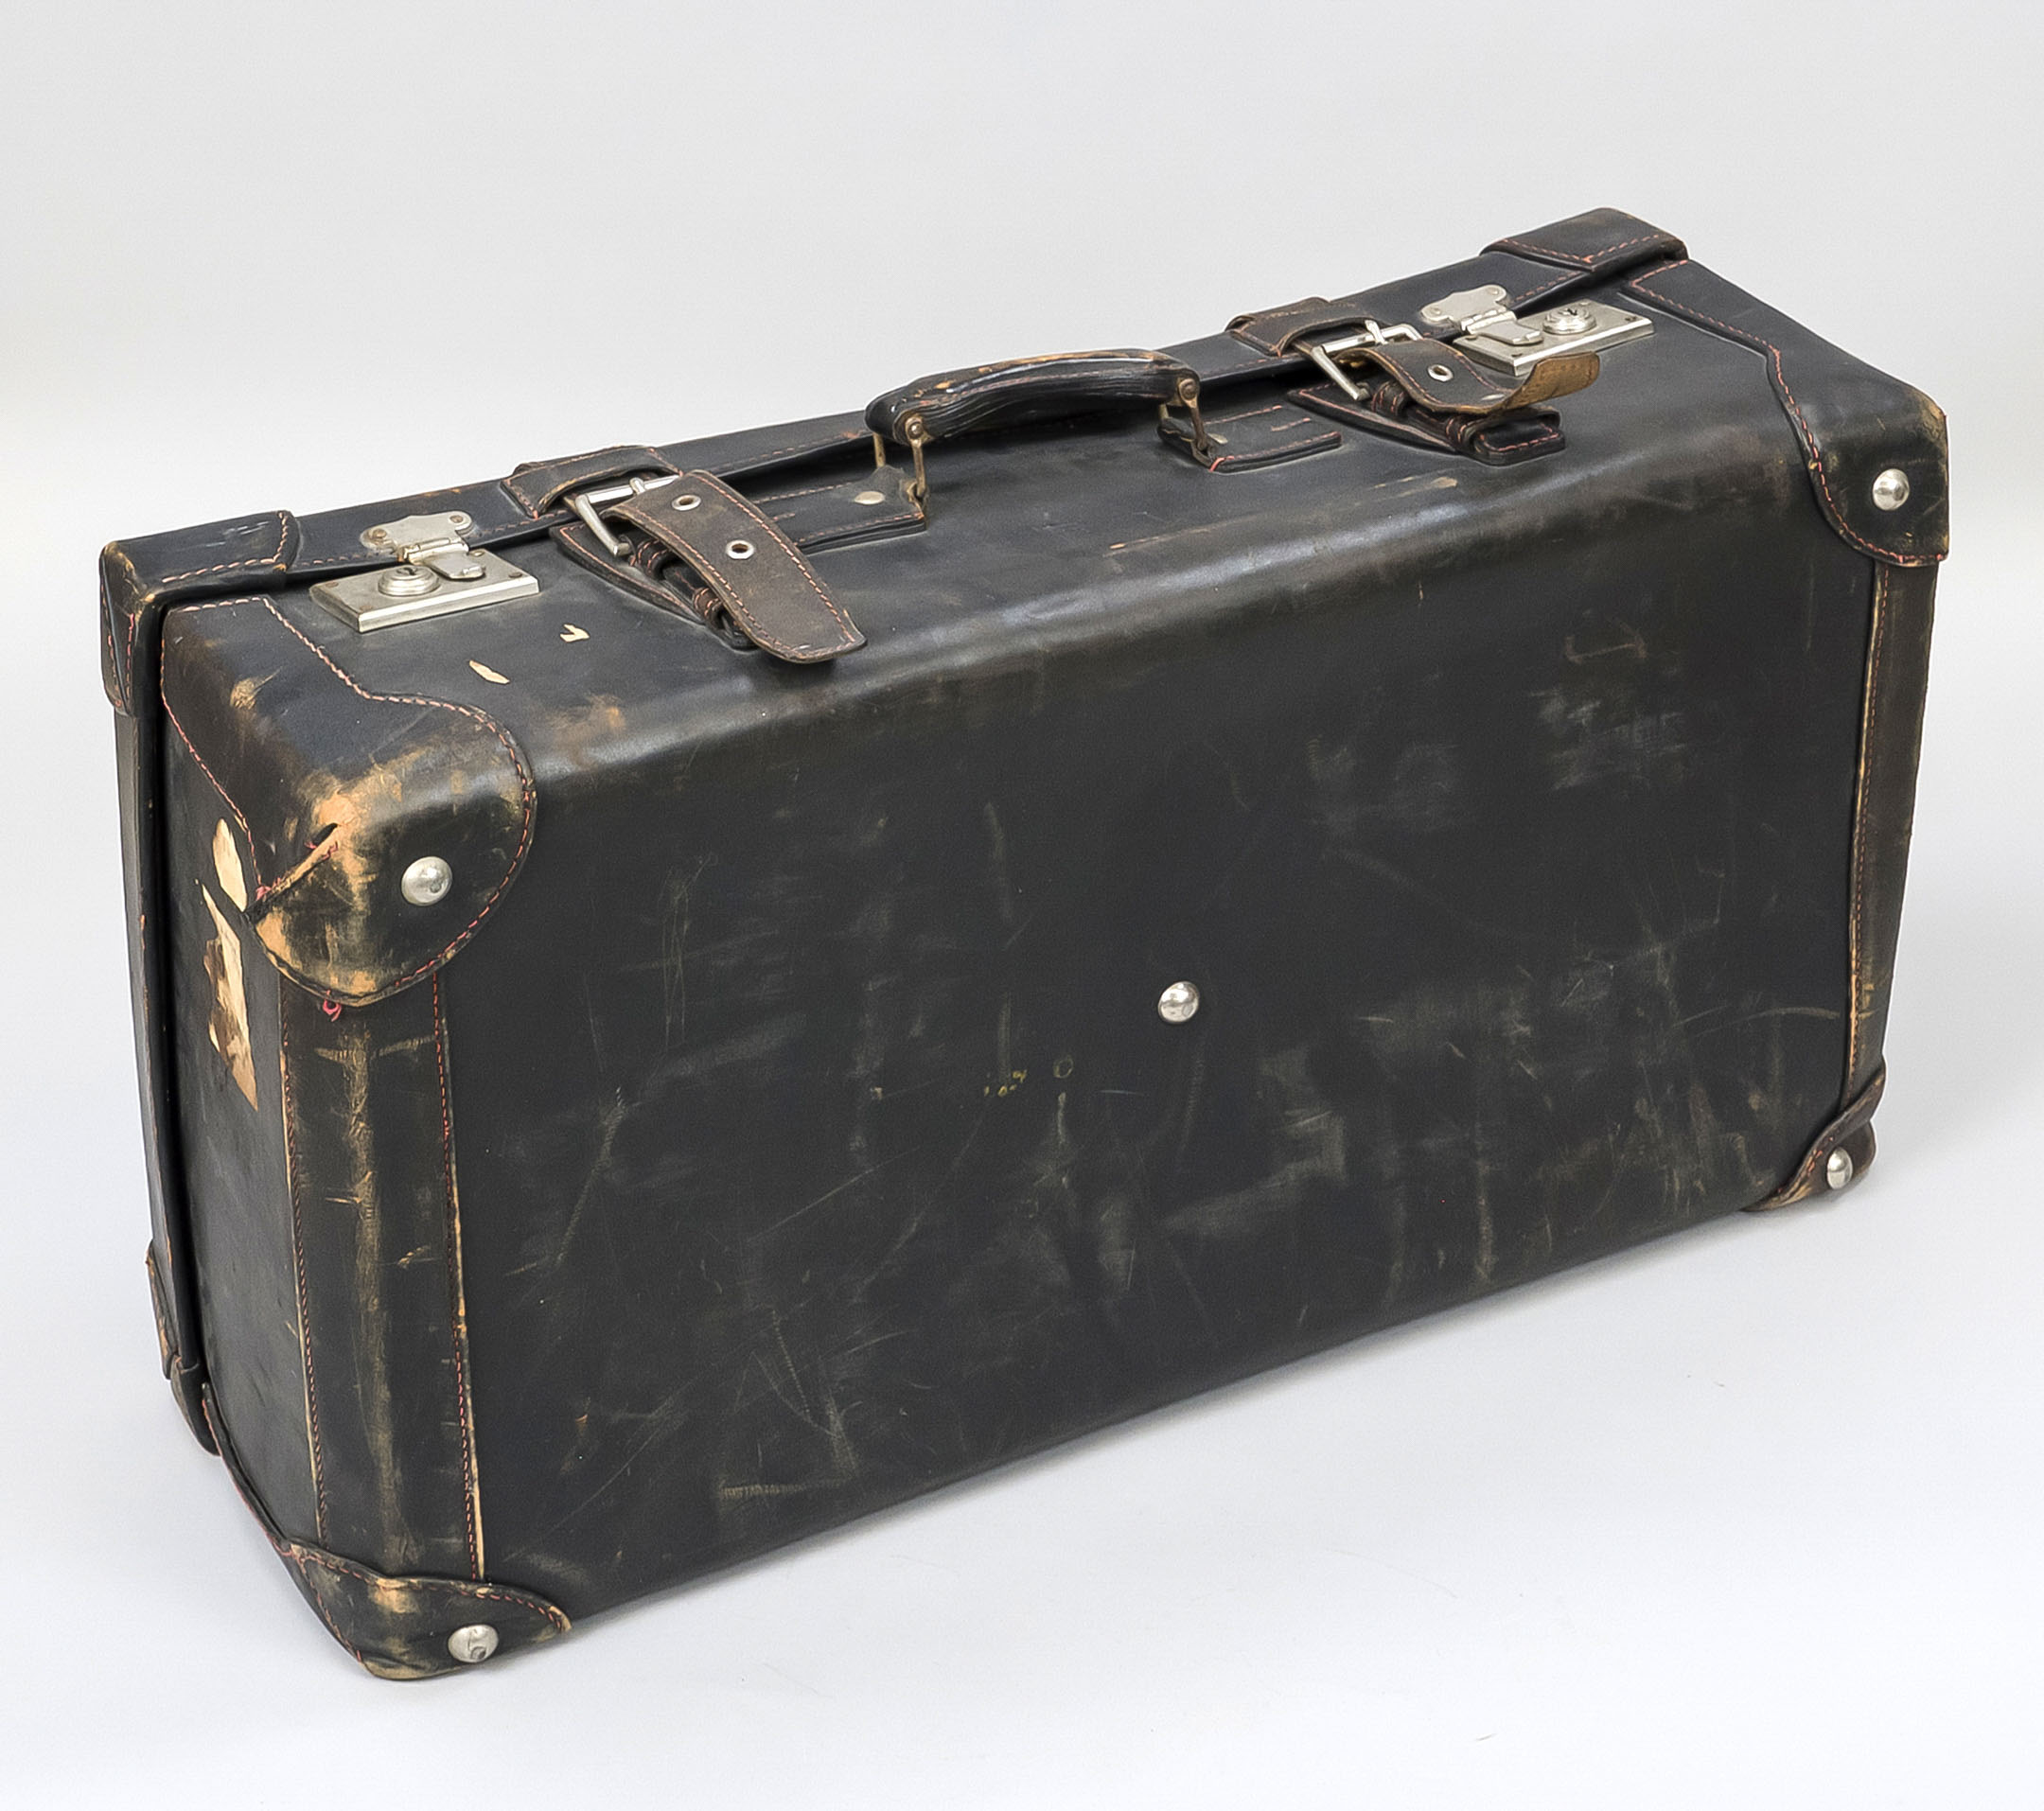 Heavy leather case, early 20th century According to the consignor, it came from the estate of